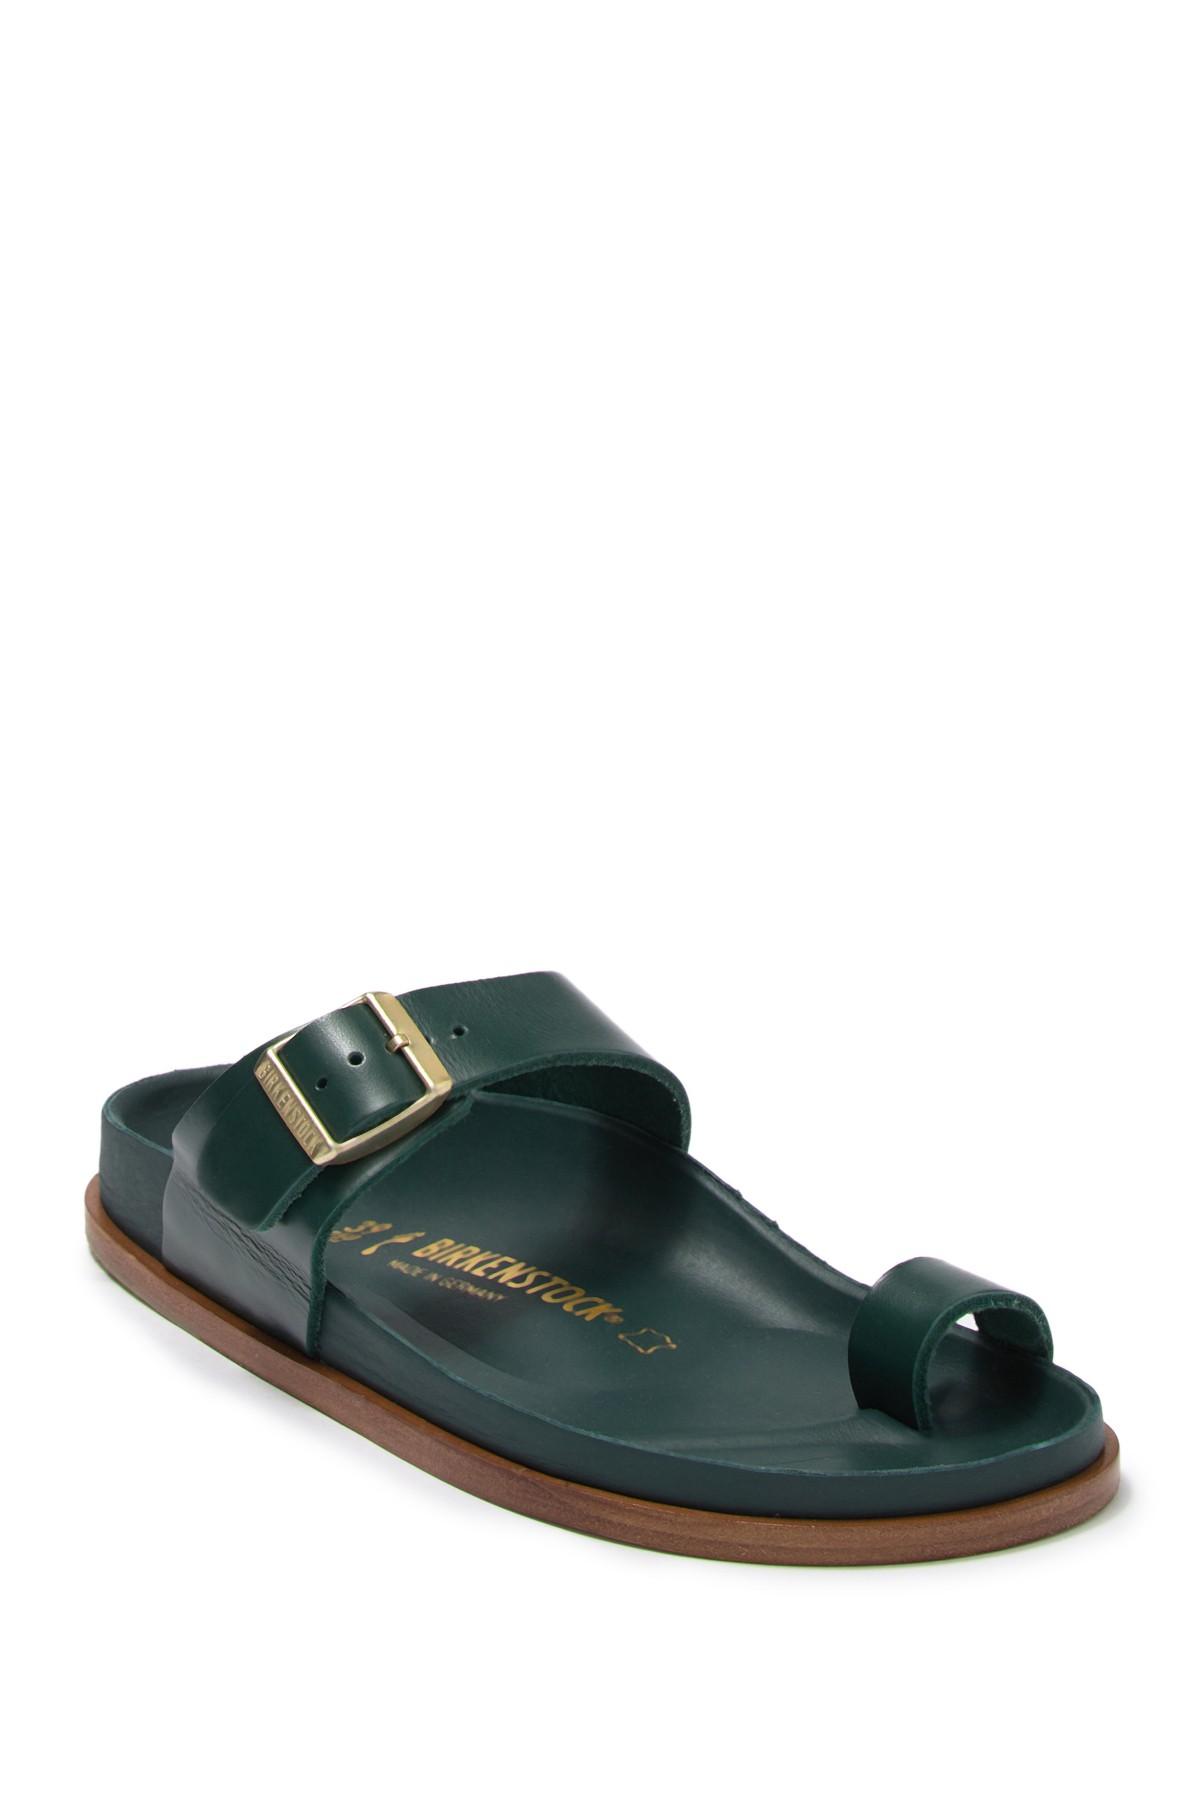 Birkenstock Ciney Leather Sandal - Discontinued in Green - Lyst